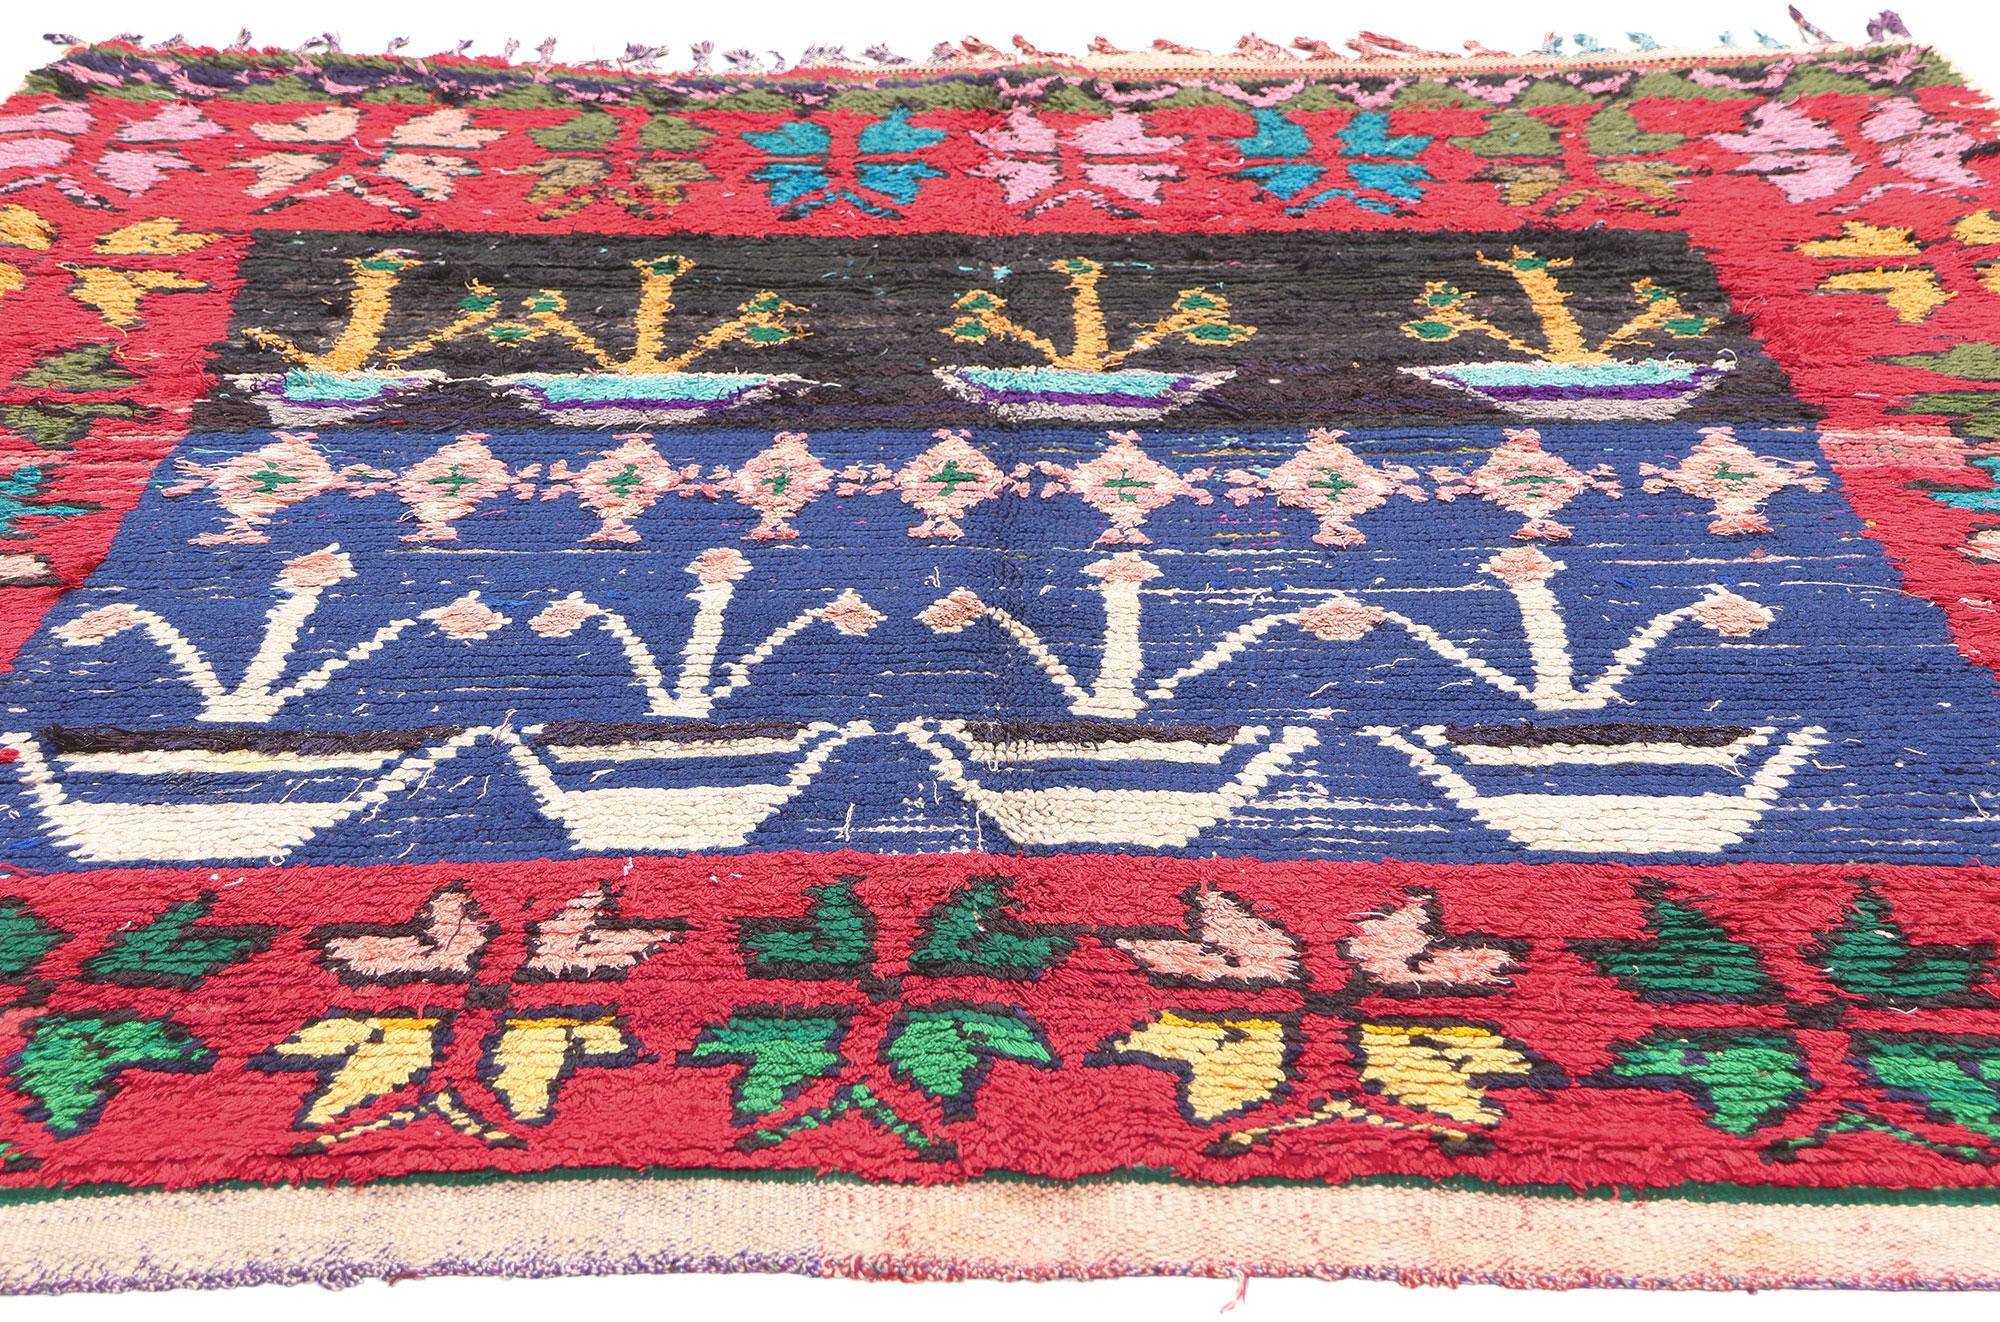 Tribal Vintage Moroccan Azilal Rug with Tree of Life Design, Berber Tribes of Morocco For Sale